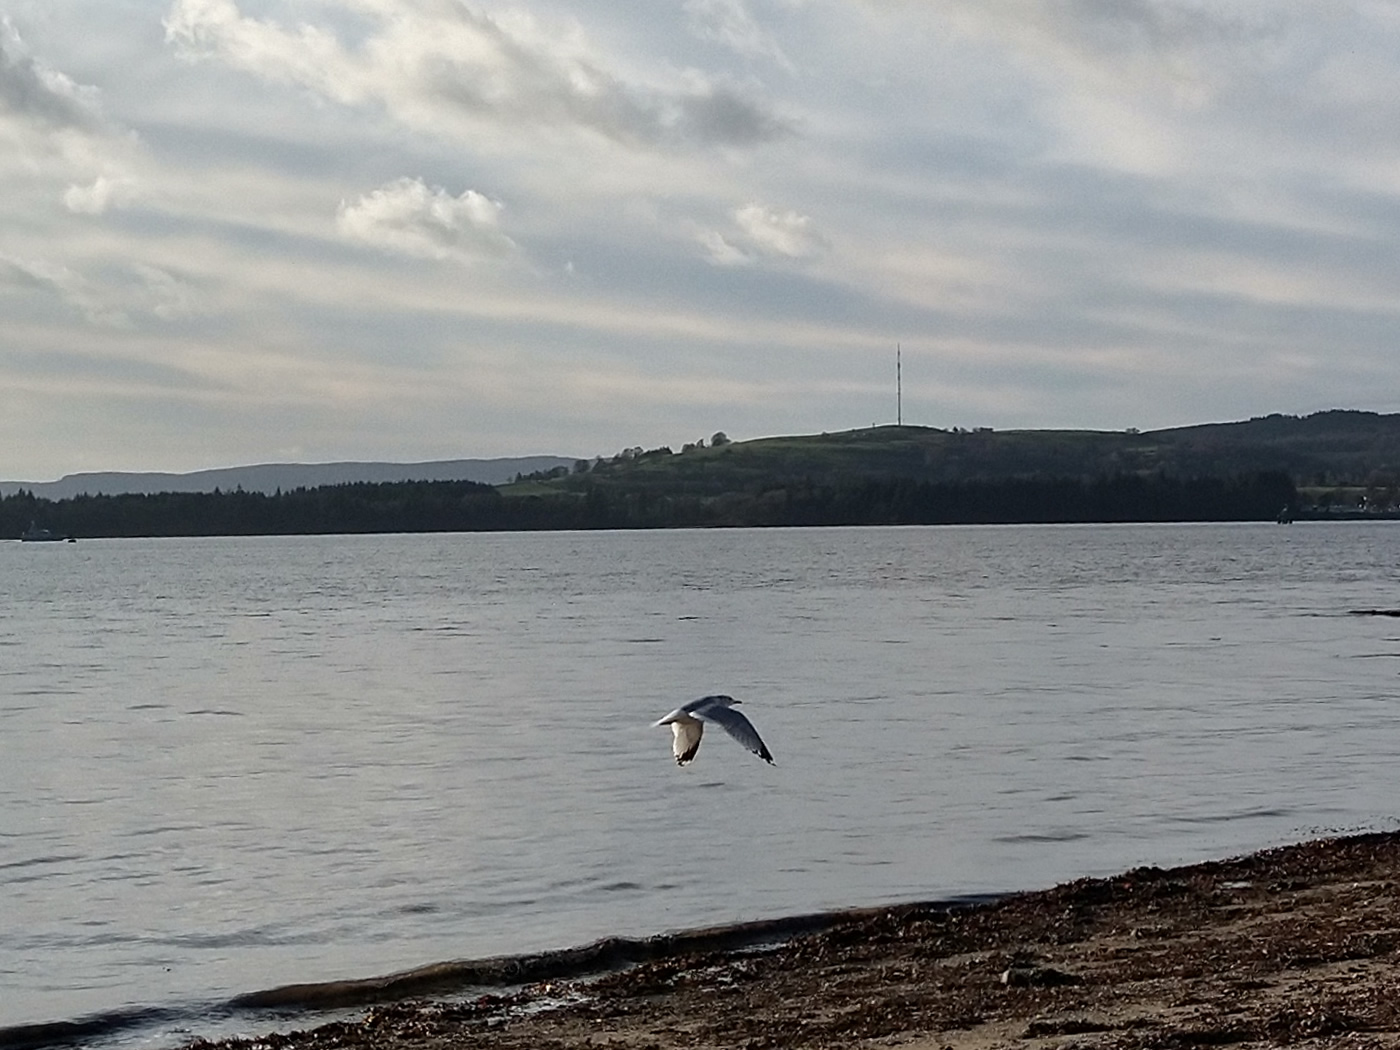 A seagull flaps its wings as it surveys the shoreline for scraps